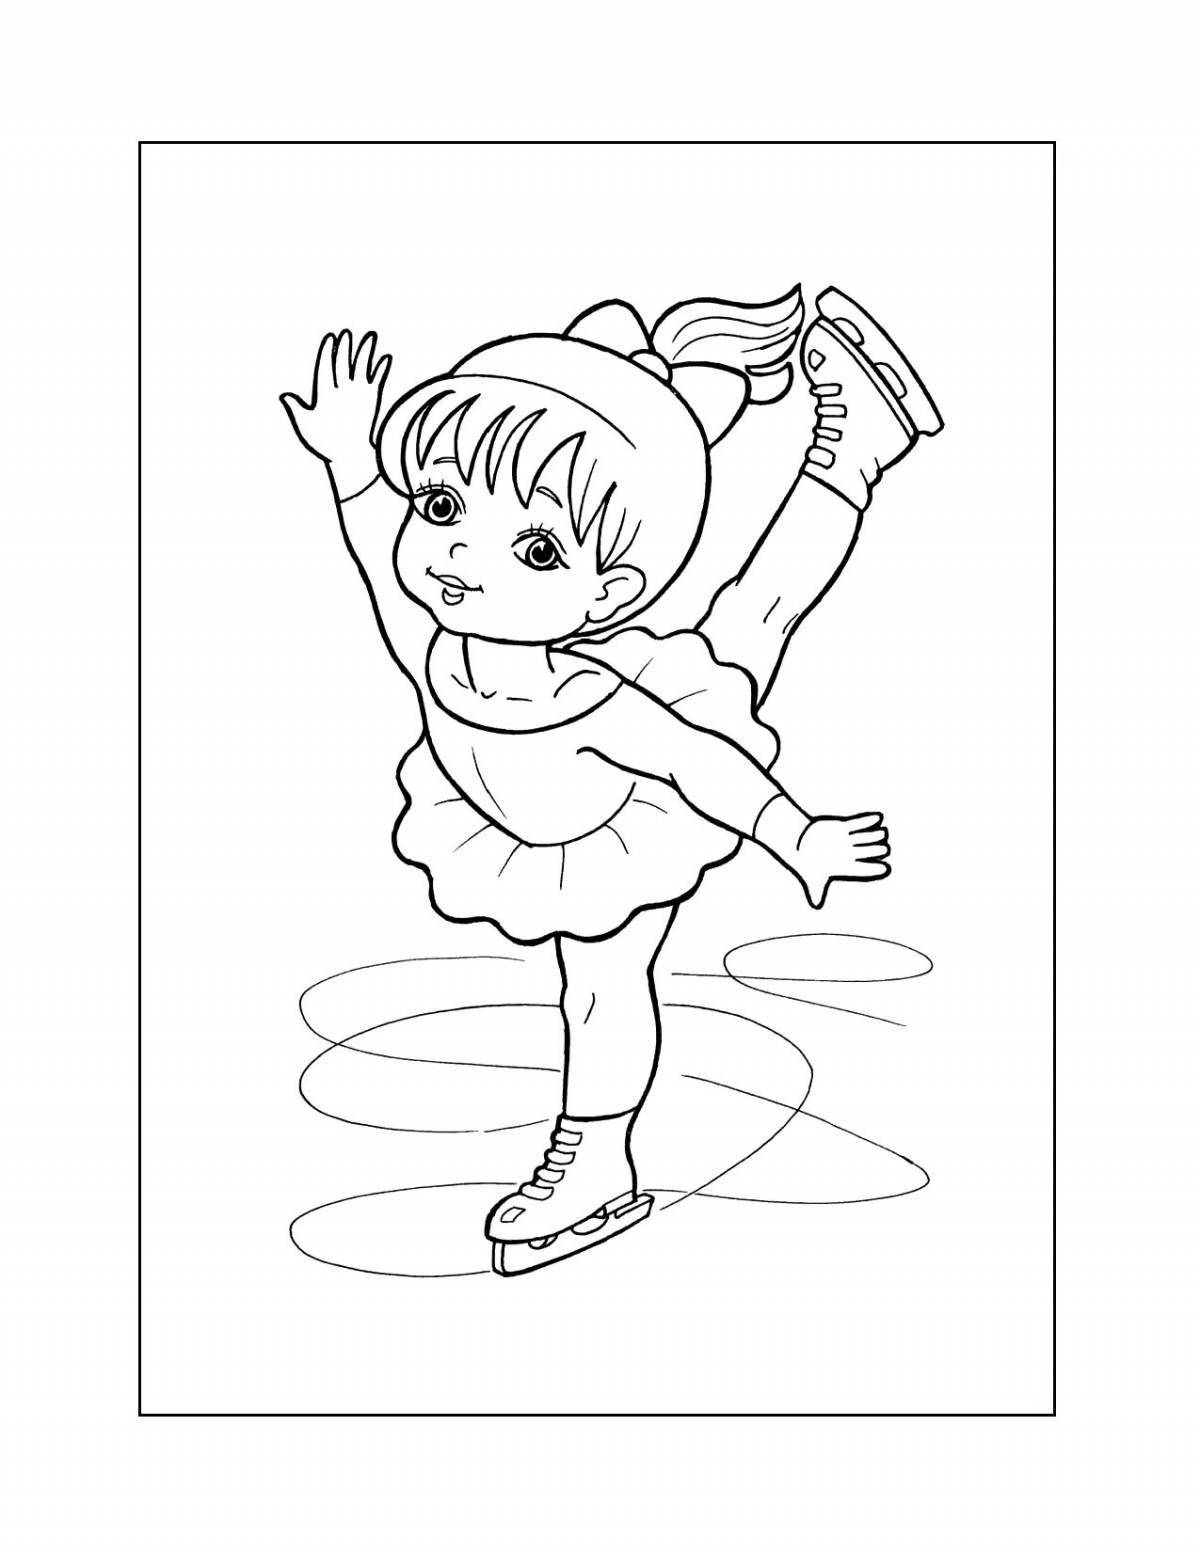 Exquisite figure skater girl coloring book